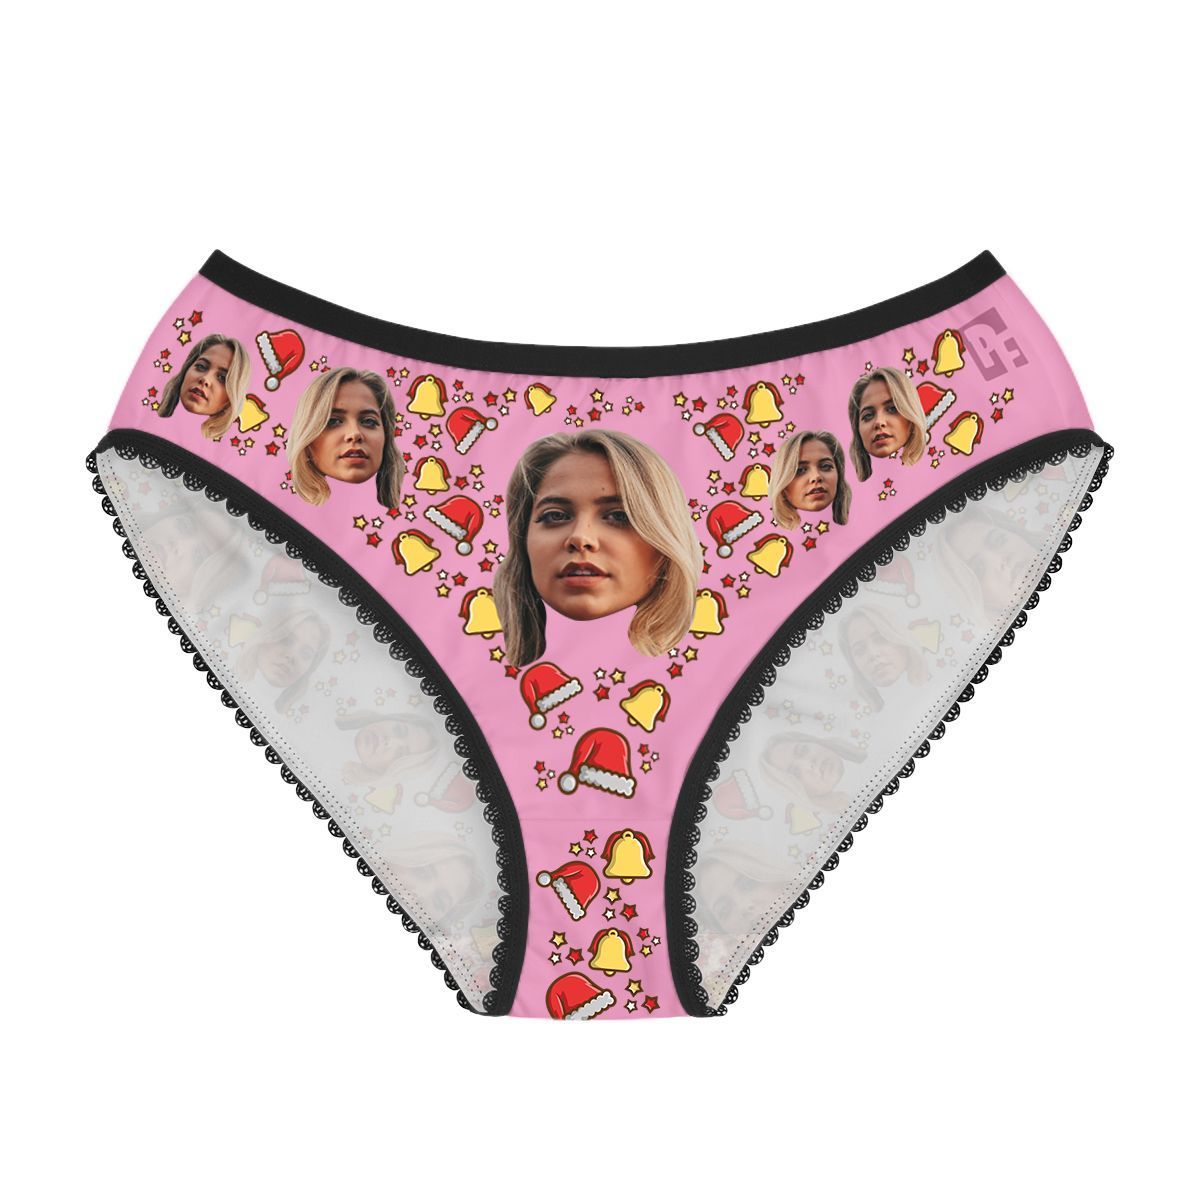 Pink Santa's hat women's underwear briefs personalized with photo printed on them